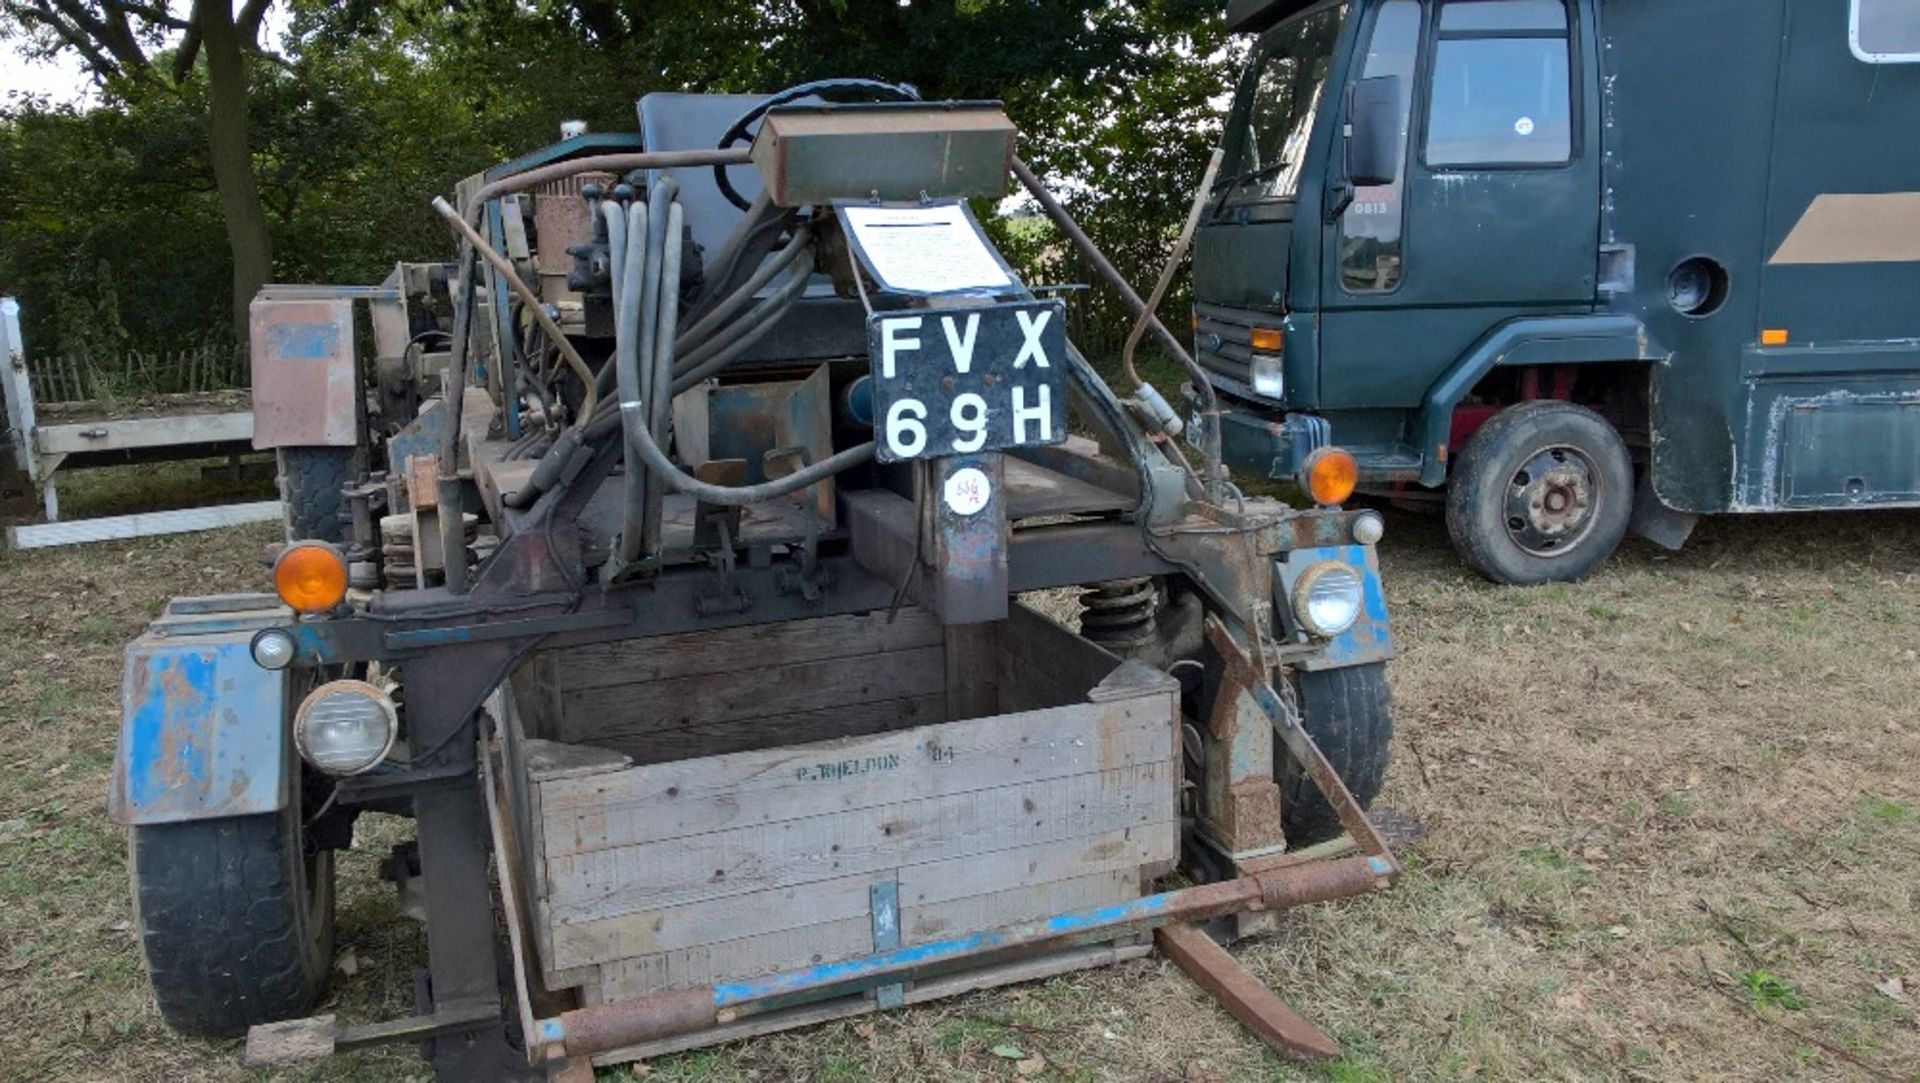 Stanhay Orchard tractor for self-loading apple boxes, powered by a Landrover 2. - Image 5 of 7